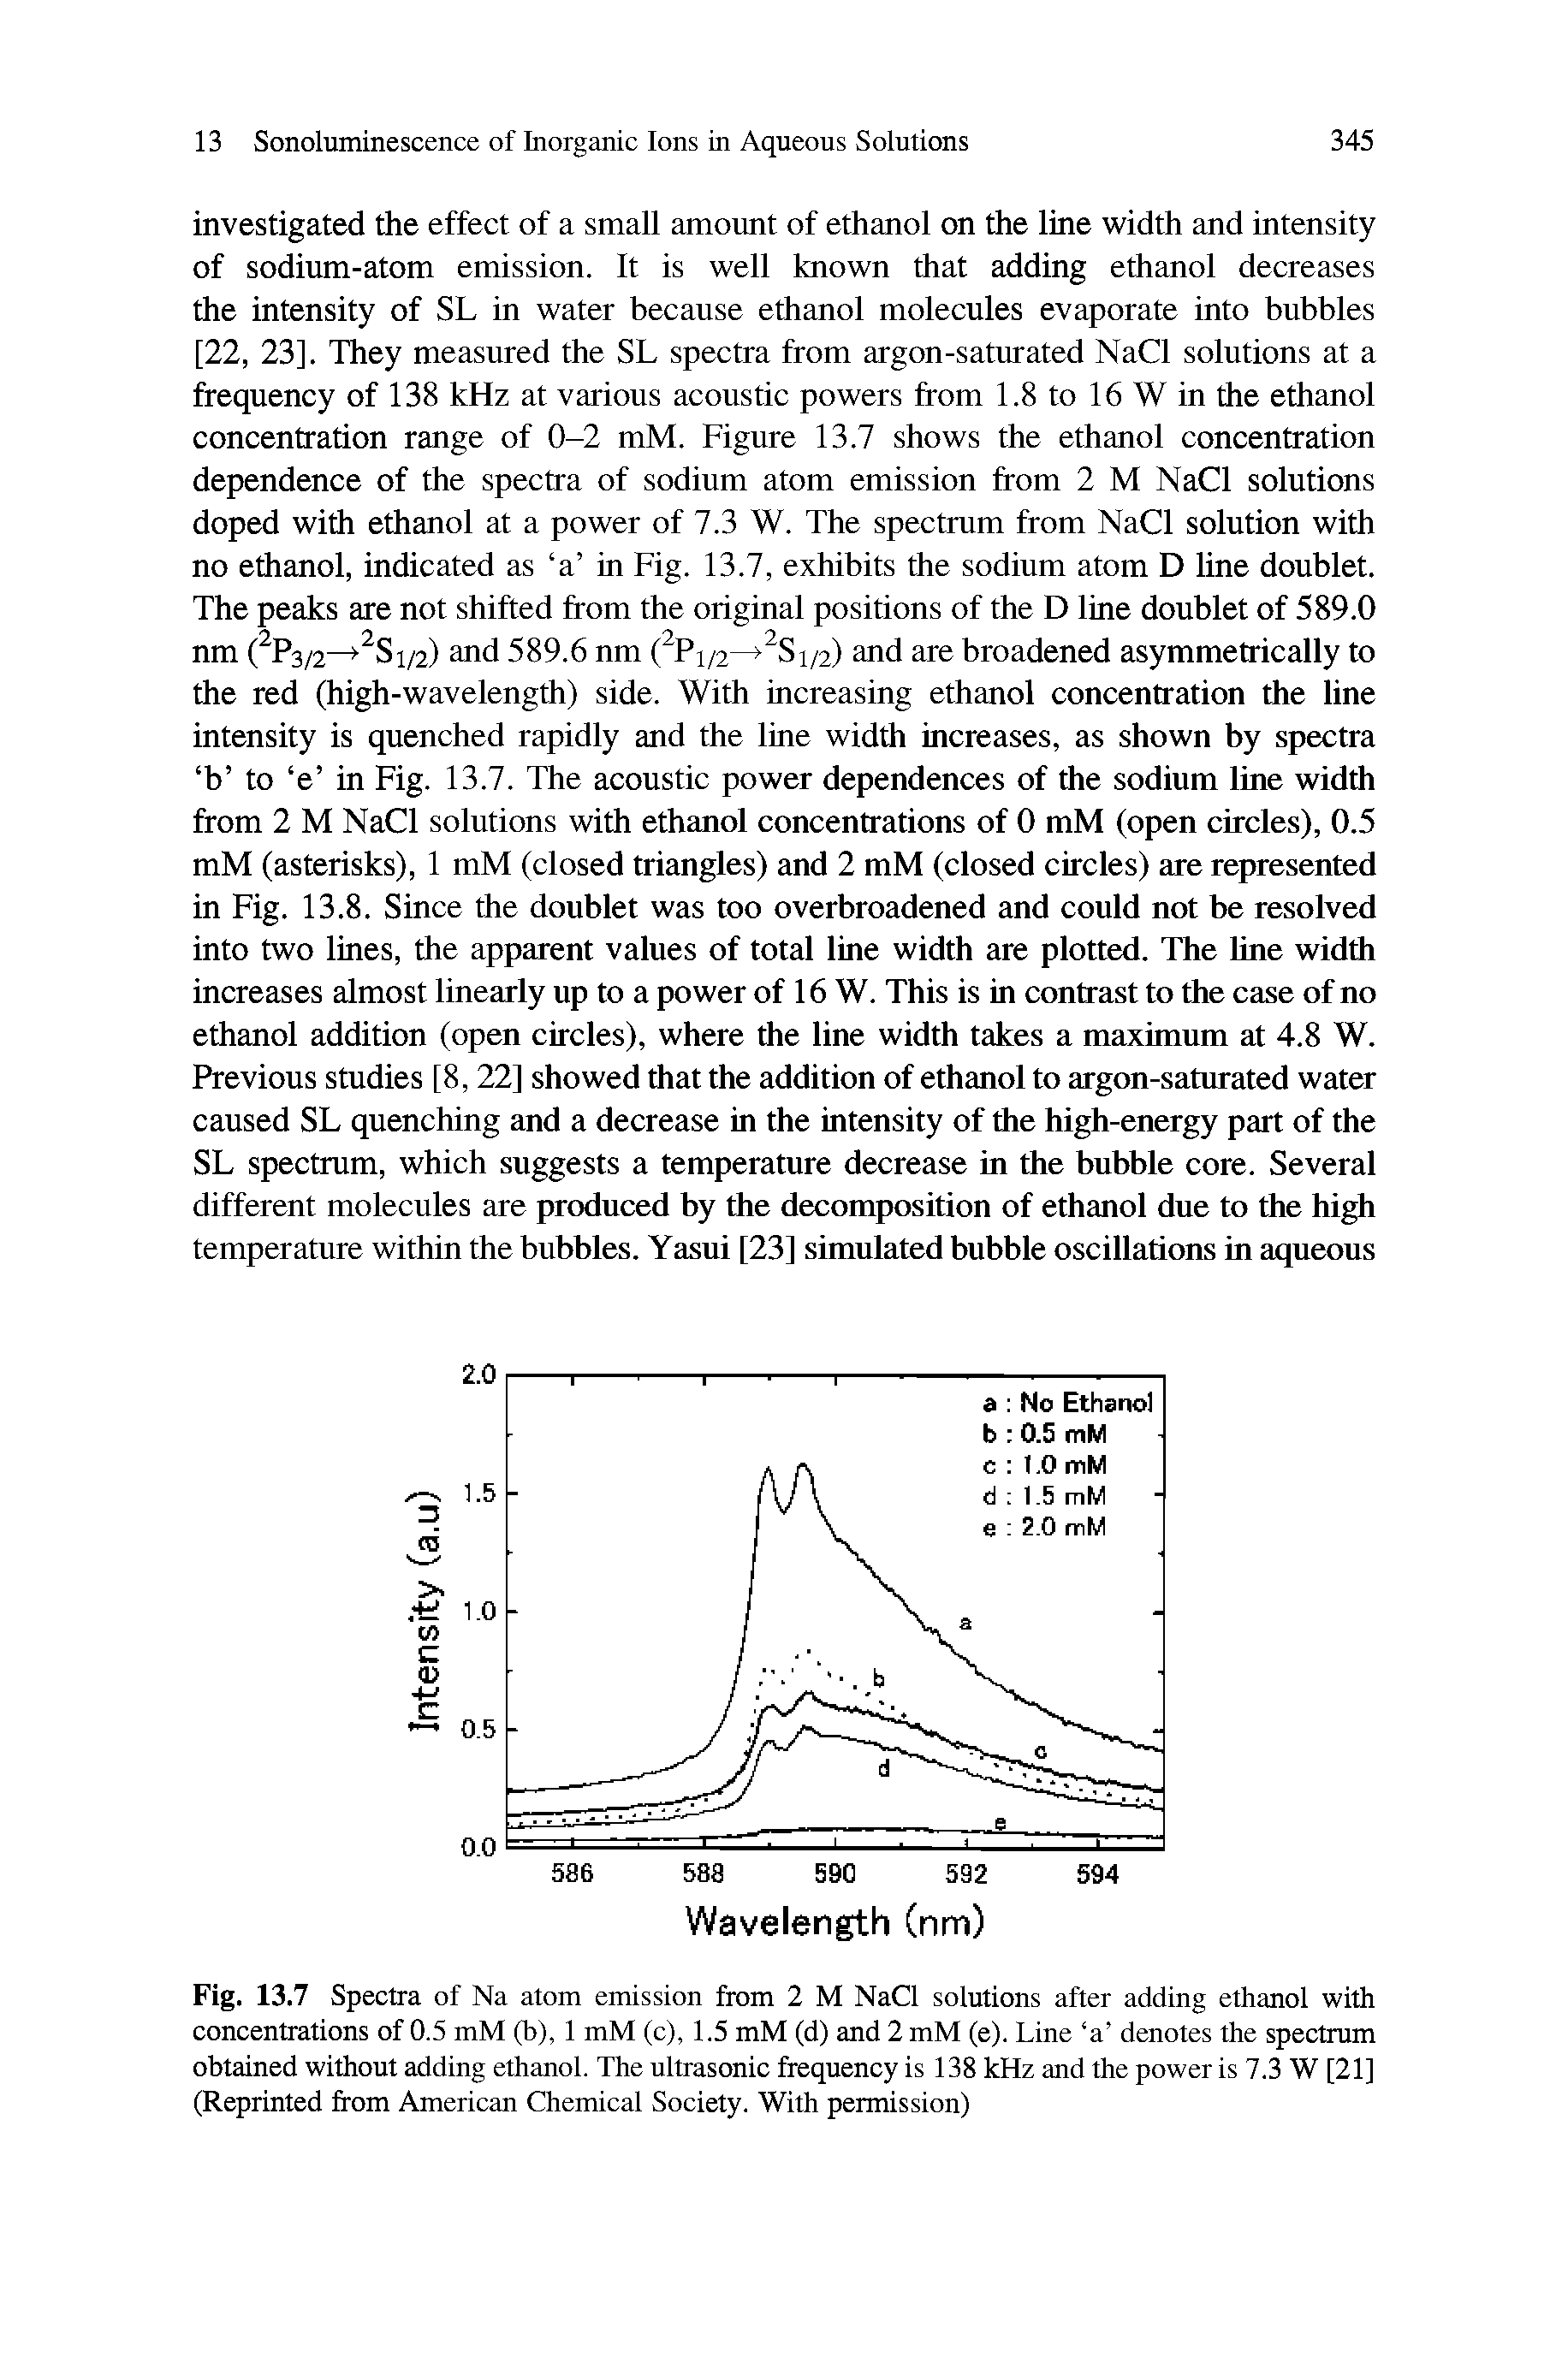 Fig. 13.7 Spectra of Na atom emission from 2 M NaCl solutions after adding ethanol with concentrations of 0.5 mM (b), 1 mM (c), 1.5 mM (d) and 2 mM (e). Line a denotes the spectrum obtained without adding ethanol. The ultrasonic frequency is 138 kHz and the power is 7.3 W [21] (Reprinted from American Chemical Society. With permission)...